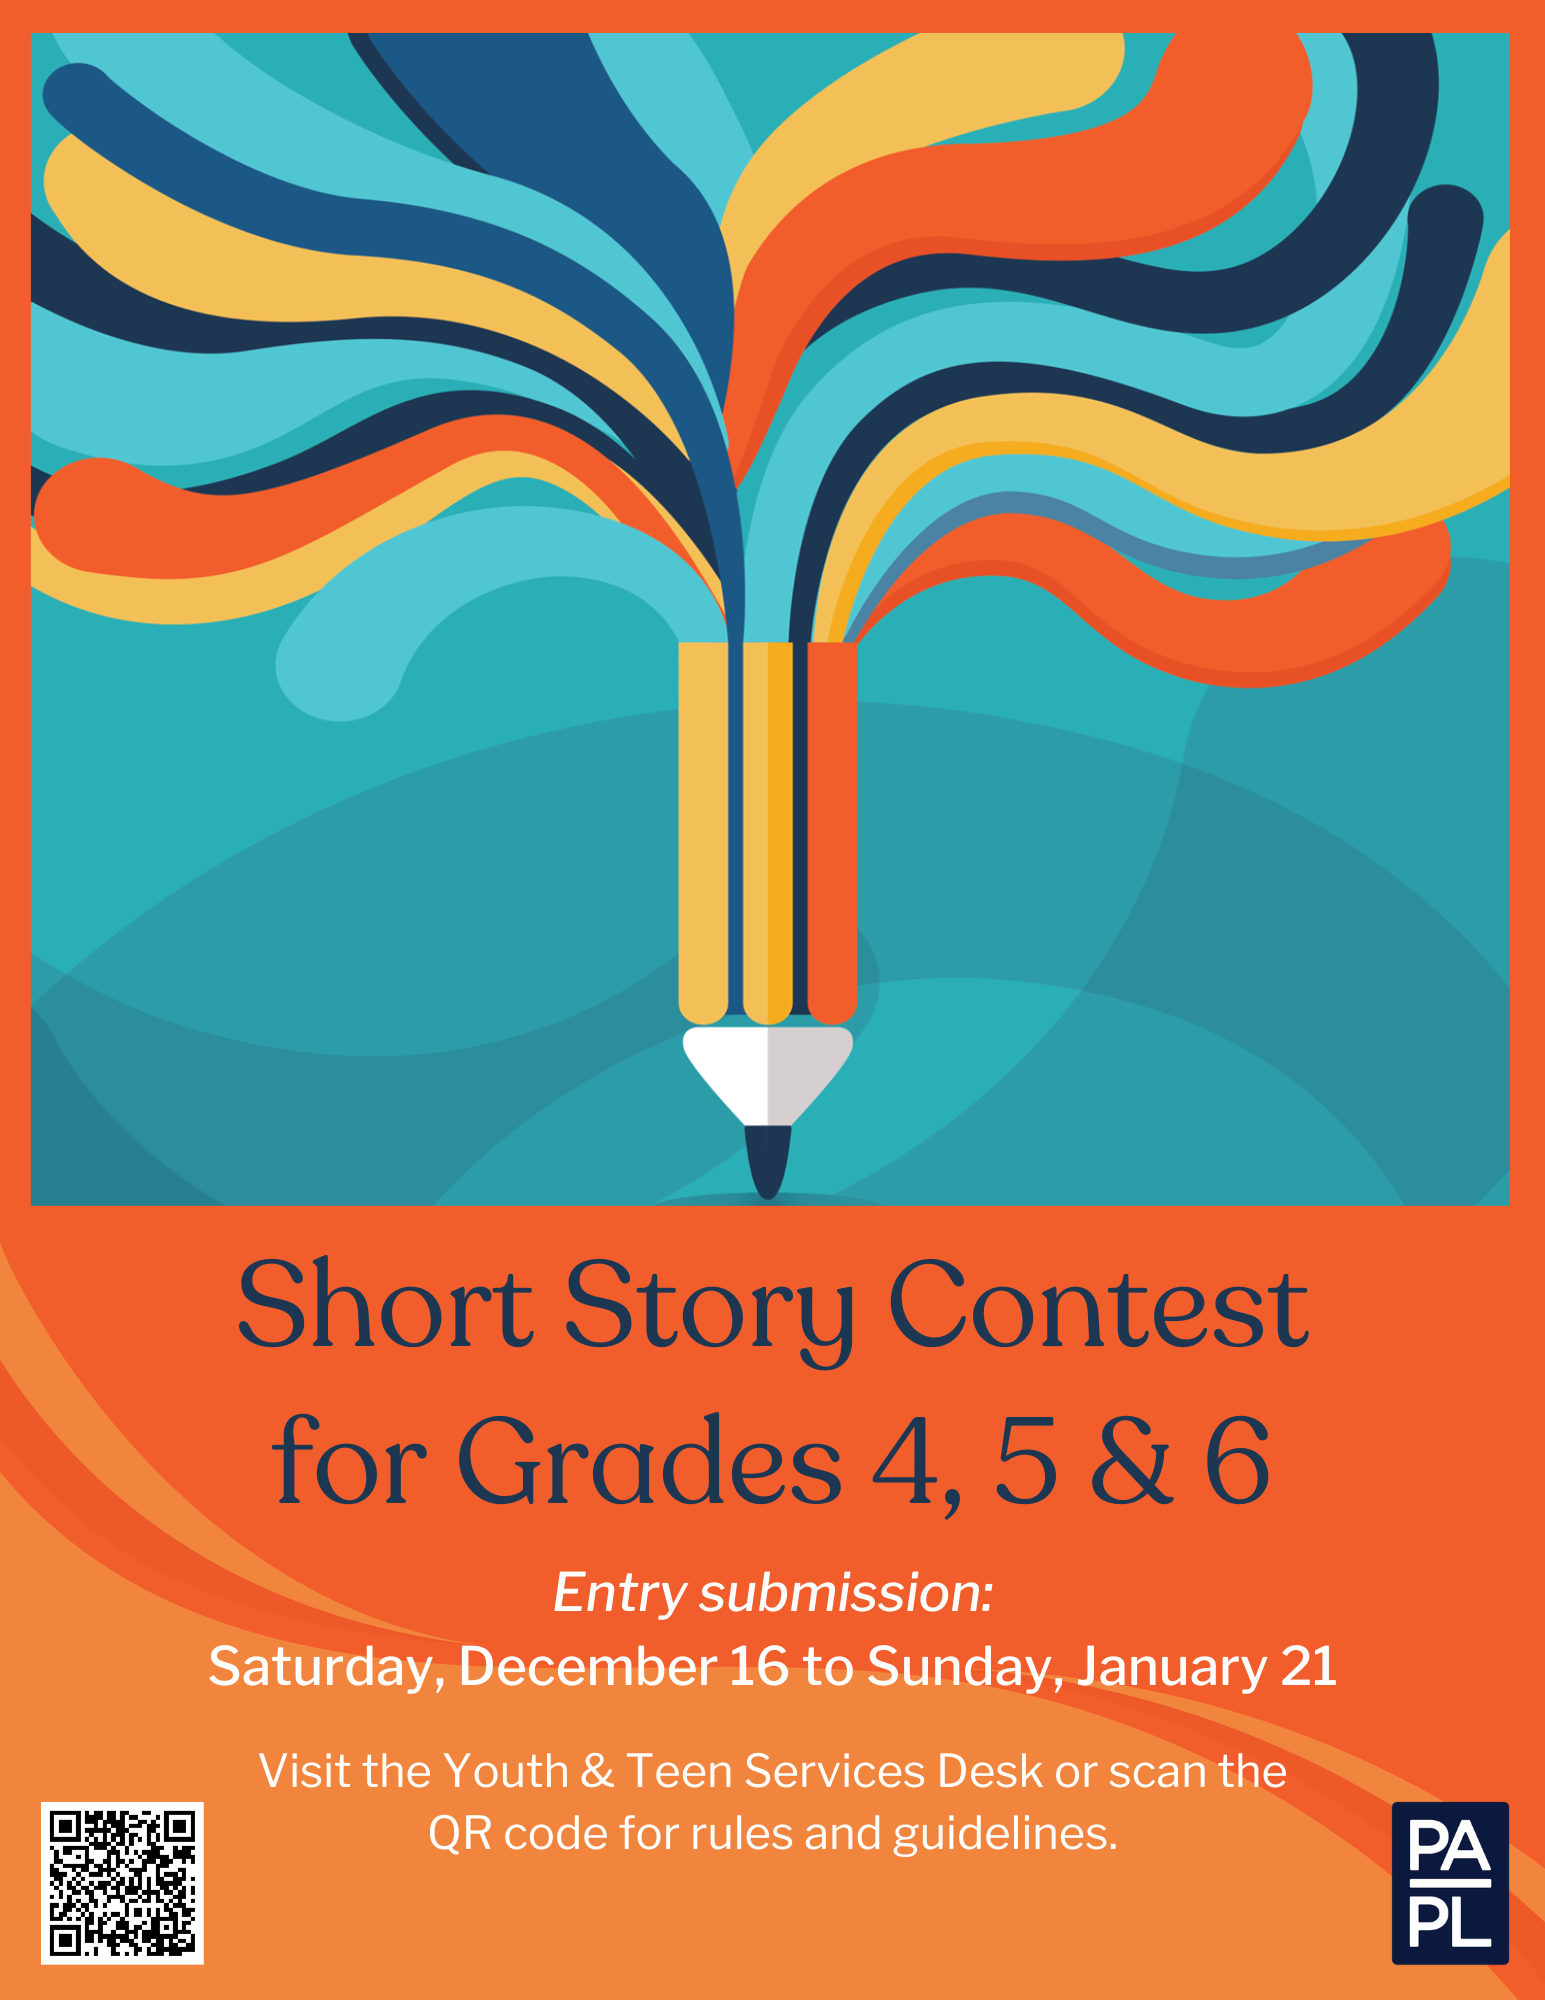 Short Story Contest Grades 4, 5 & 6 Entries 12/16 to 1/21